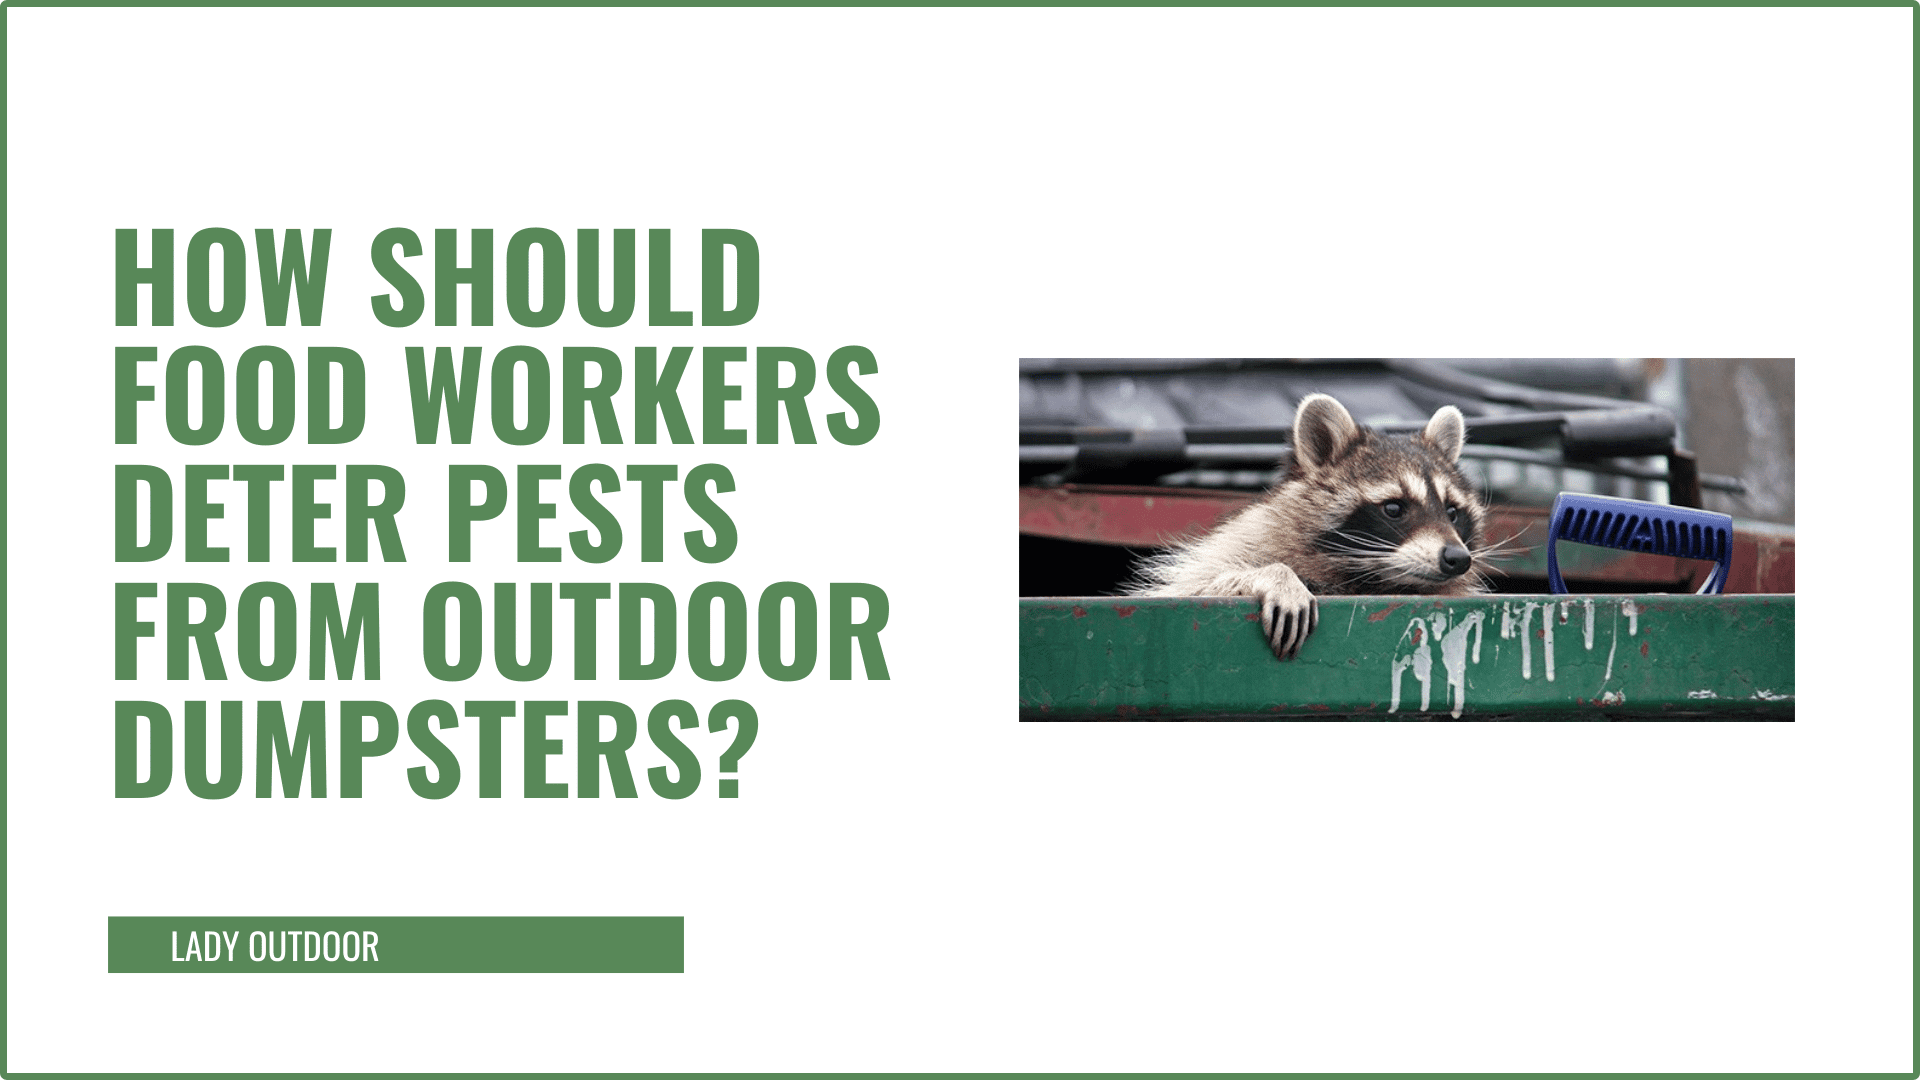 How Should Food Workers Deter Pests from Outdoor Dumpsters?